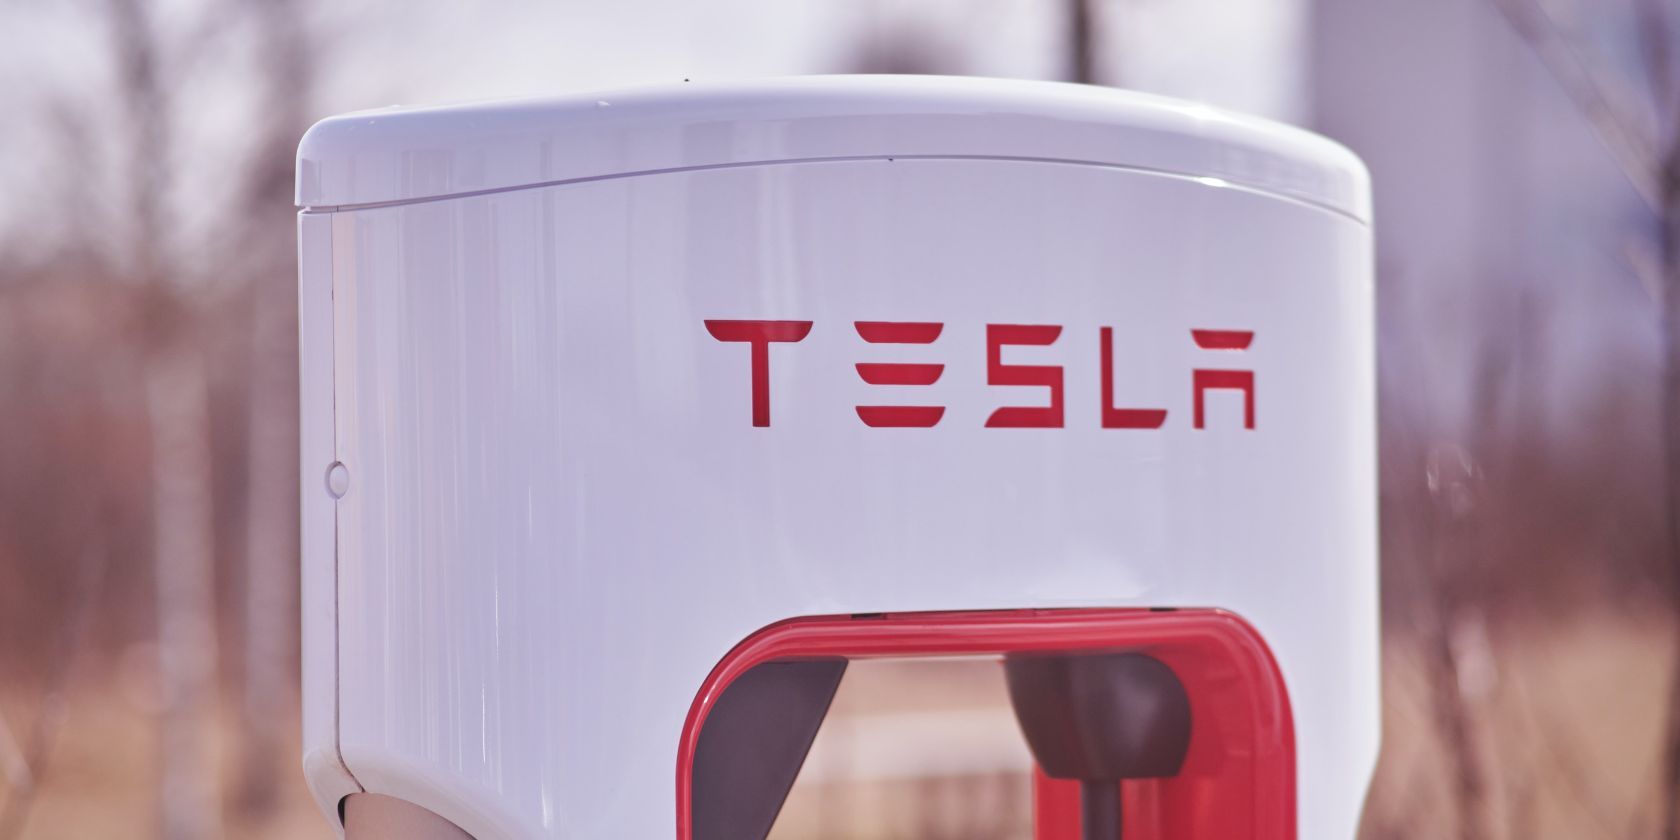 Tesla Supercharger vs. Destination Charger: What’s the Difference?